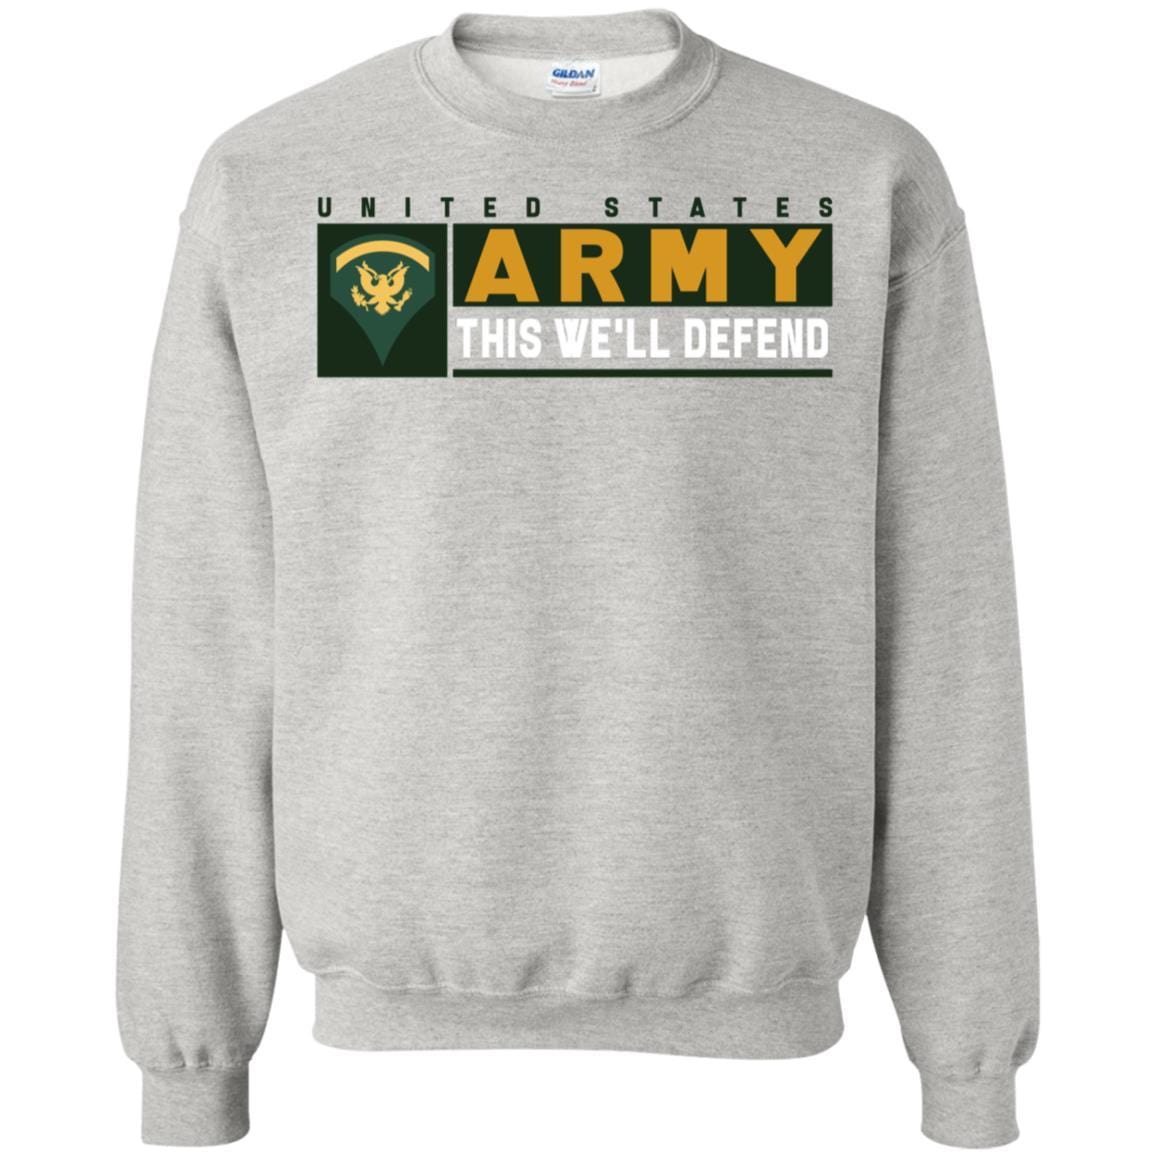 US Army E-5 SPC This We Will Defend Long Sleeve - Pullover Hoodie-TShirt-Army-Veterans Nation